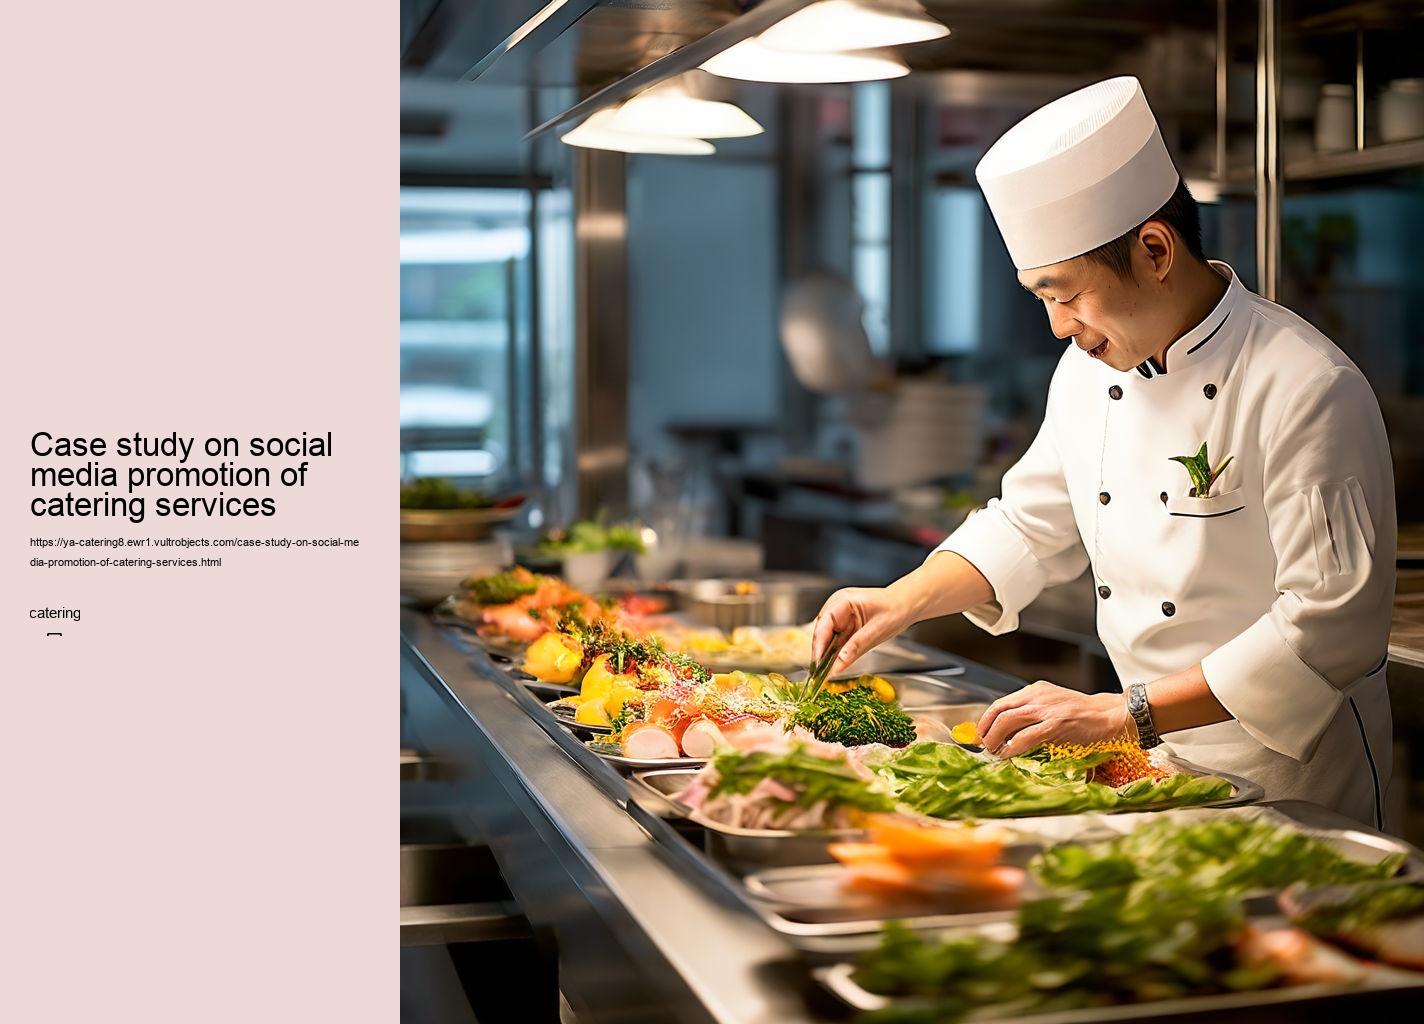 Case study on social media promotion of catering services